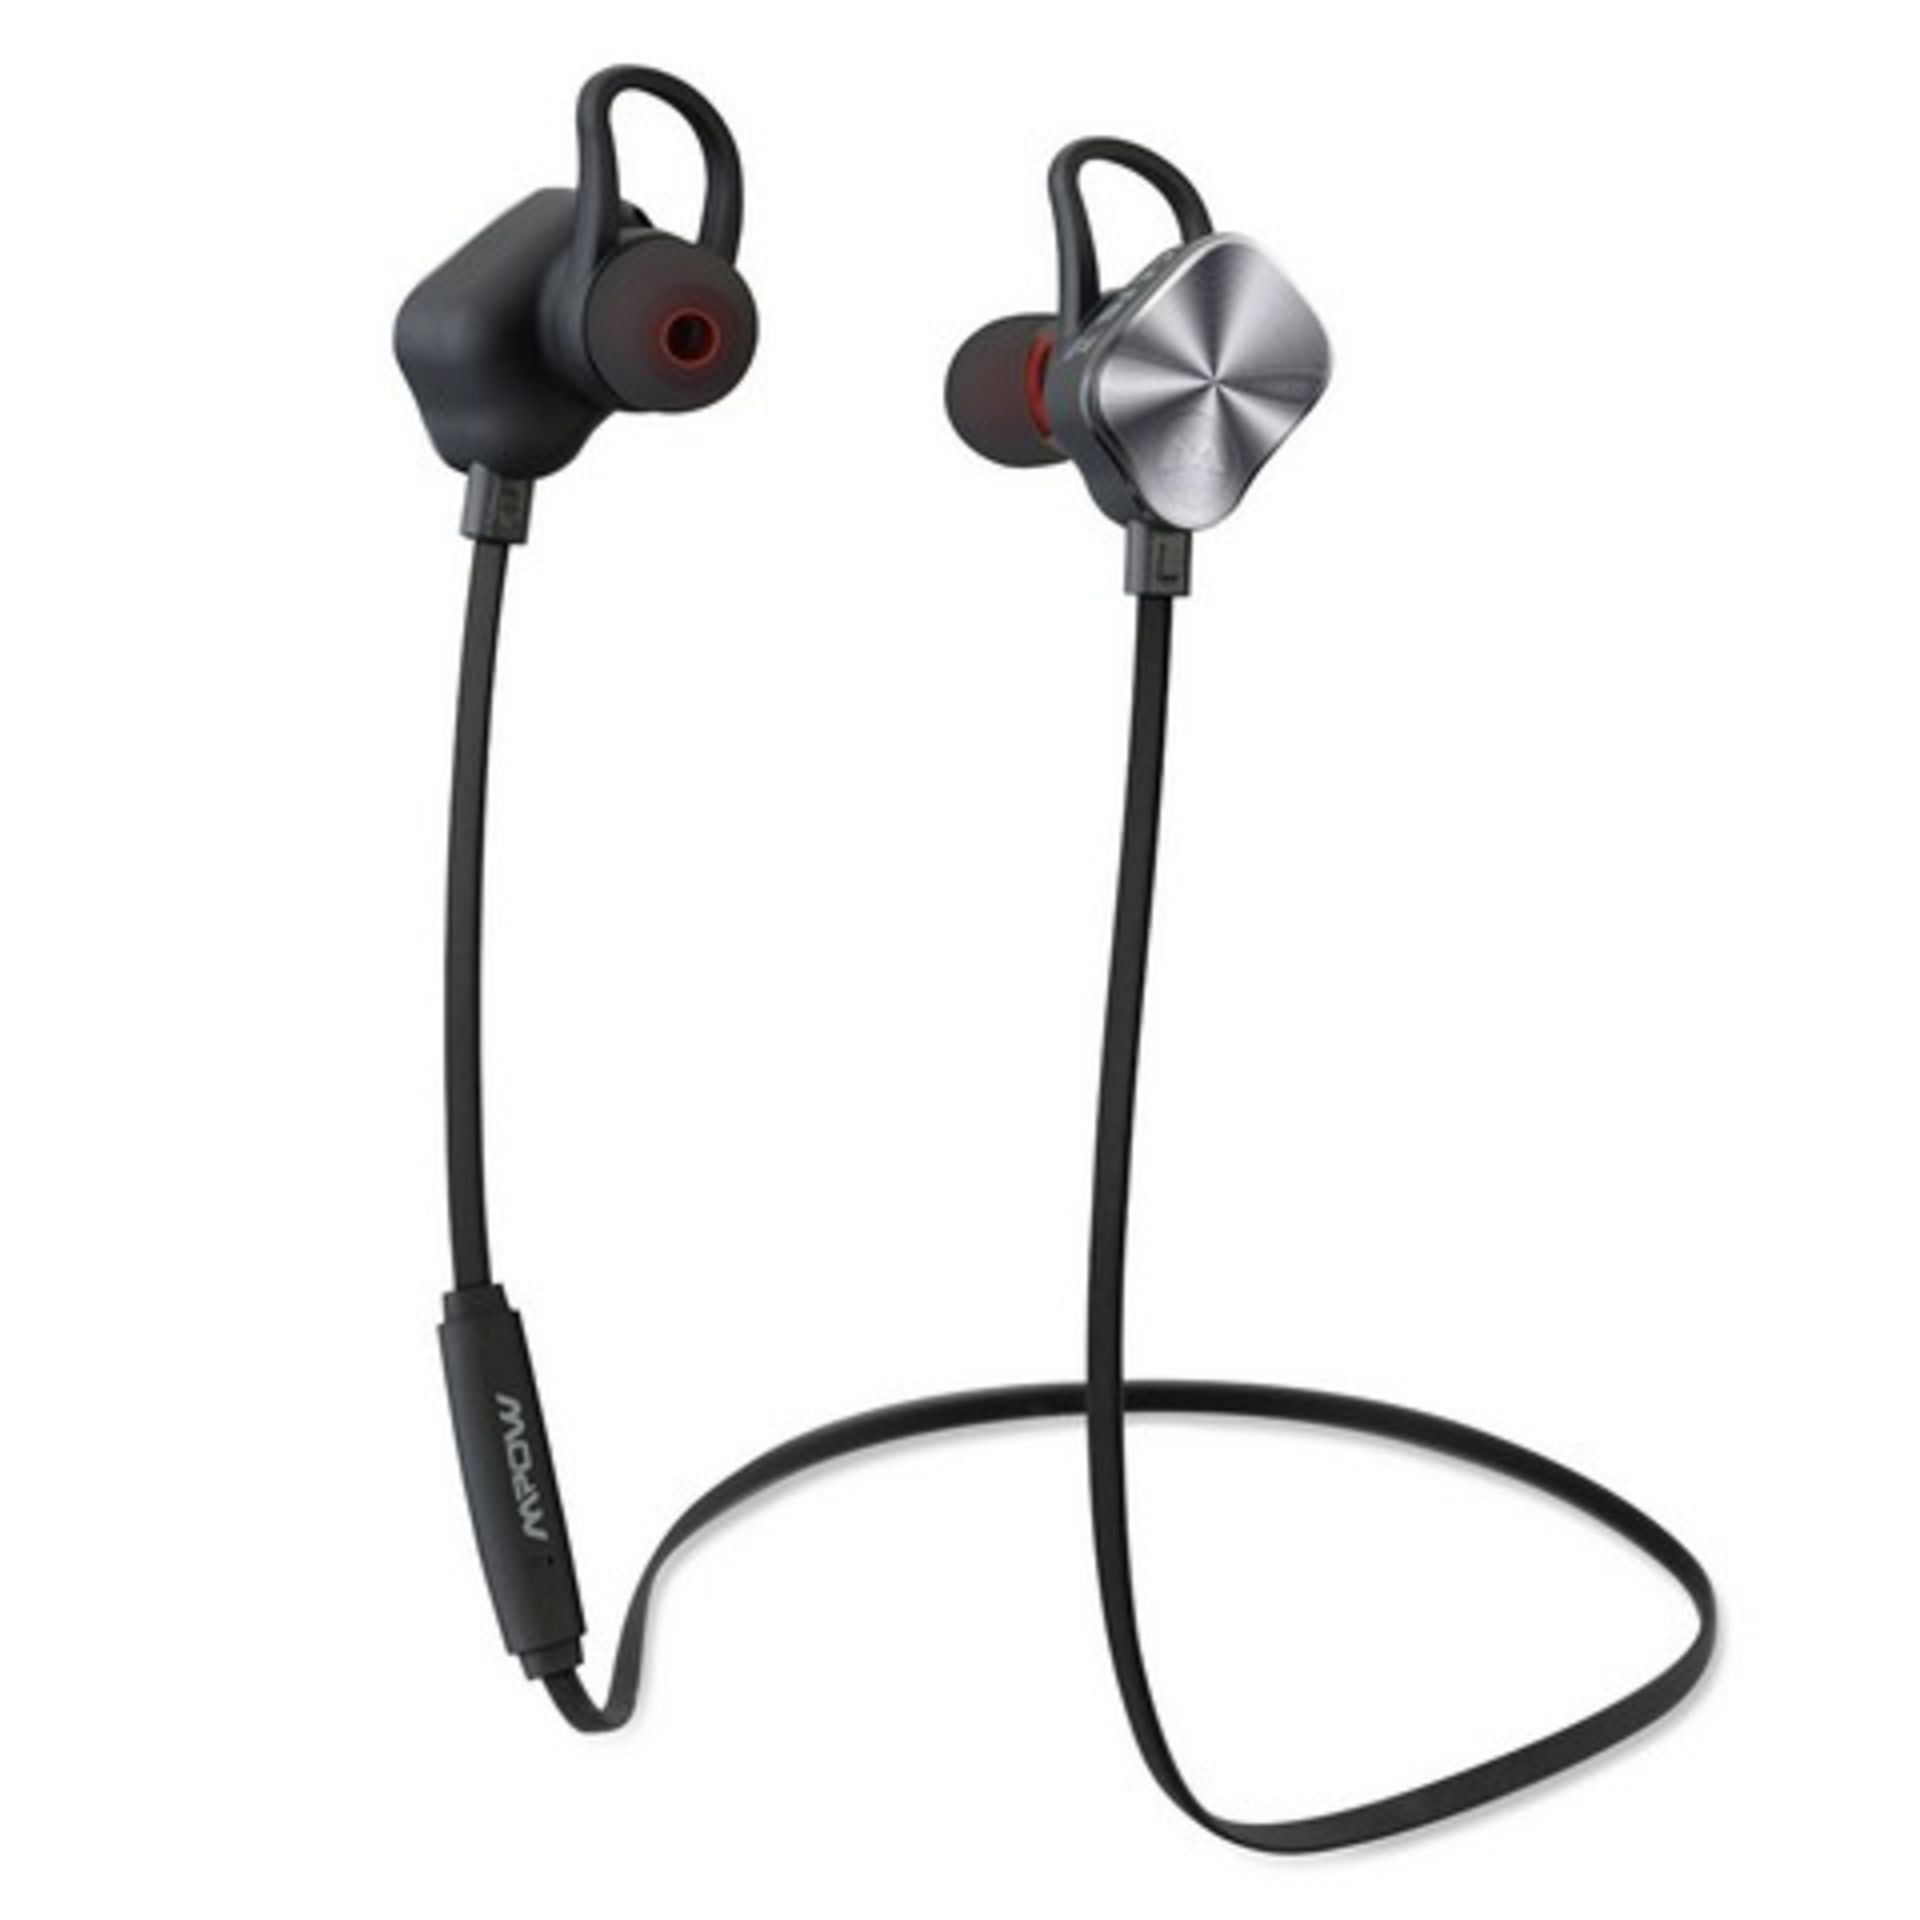 V Grade A Pair of Bluetooth Earphones/Headset (All Boxed) - Colours and Styles/Makes May Vary - Some - Image 6 of 7